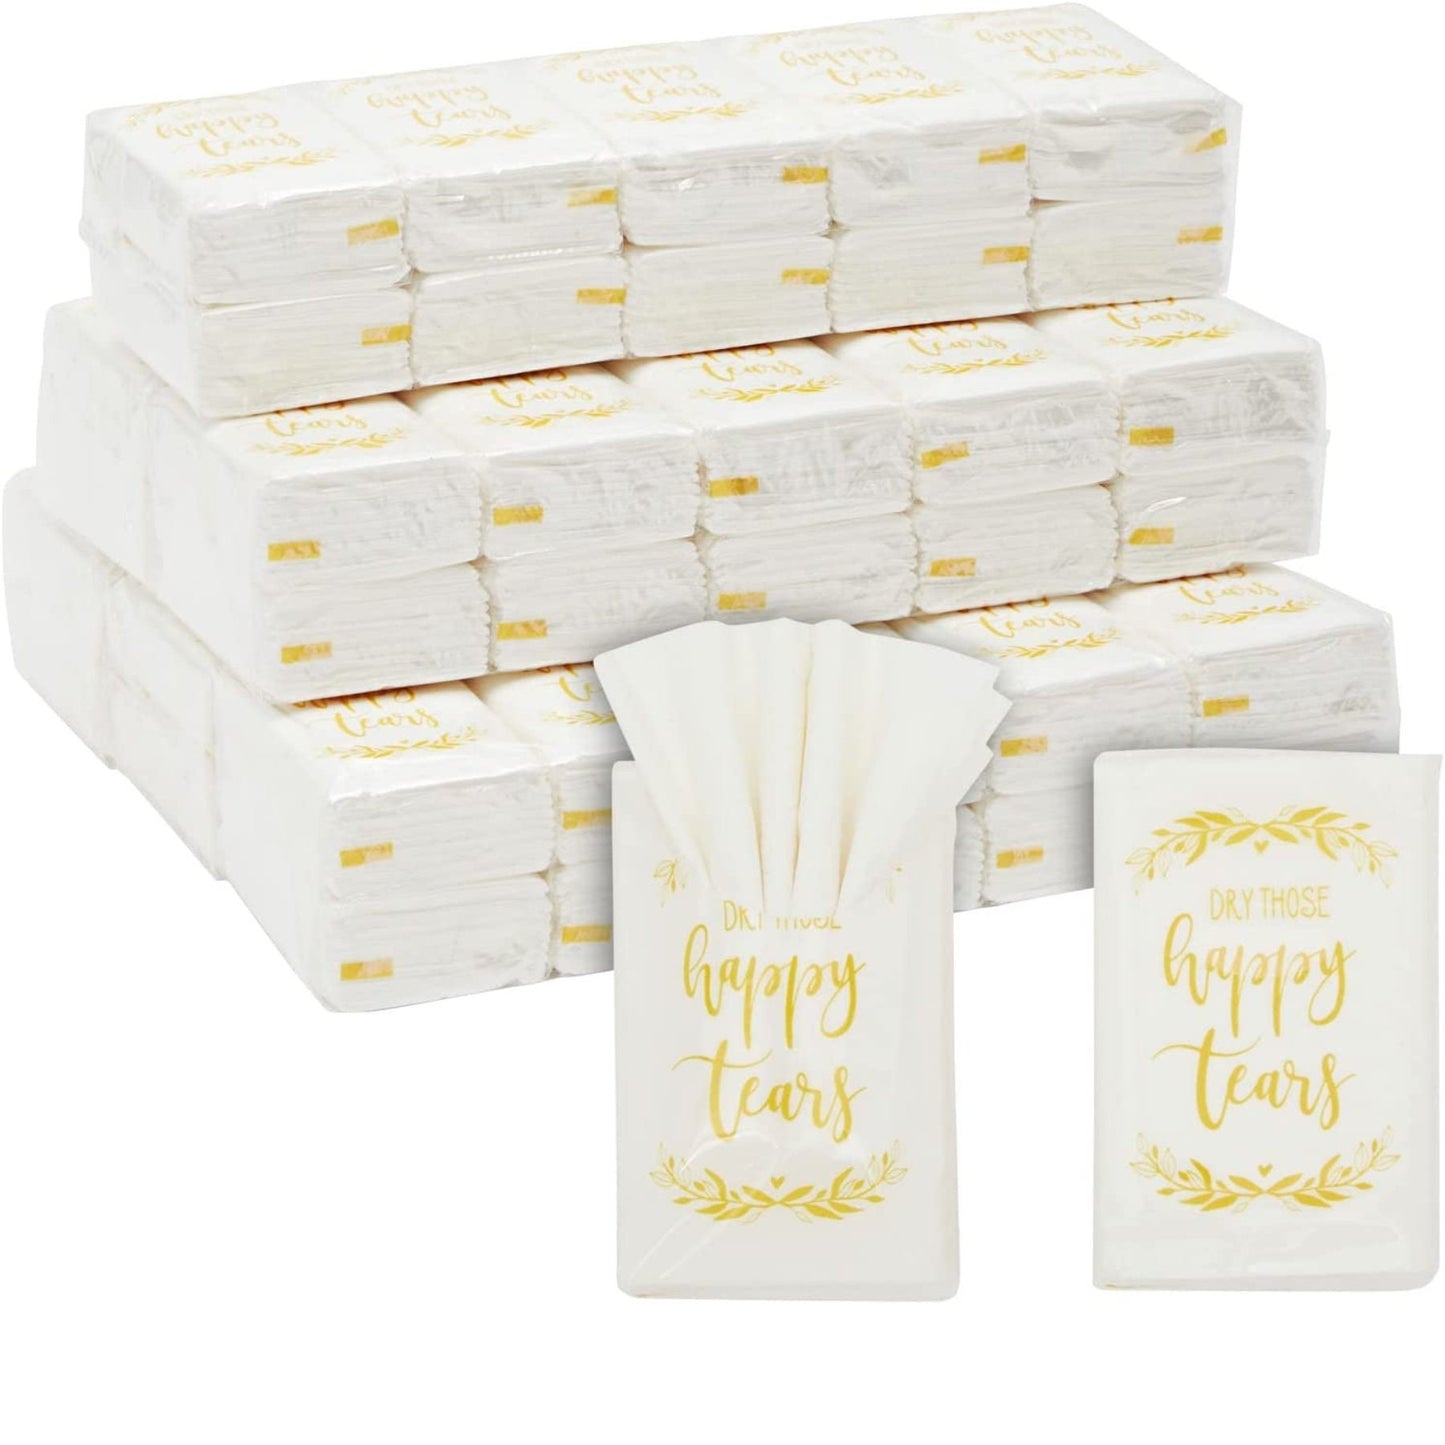 Wedding Tissues Packs for Guests Dry Those Happy Tears